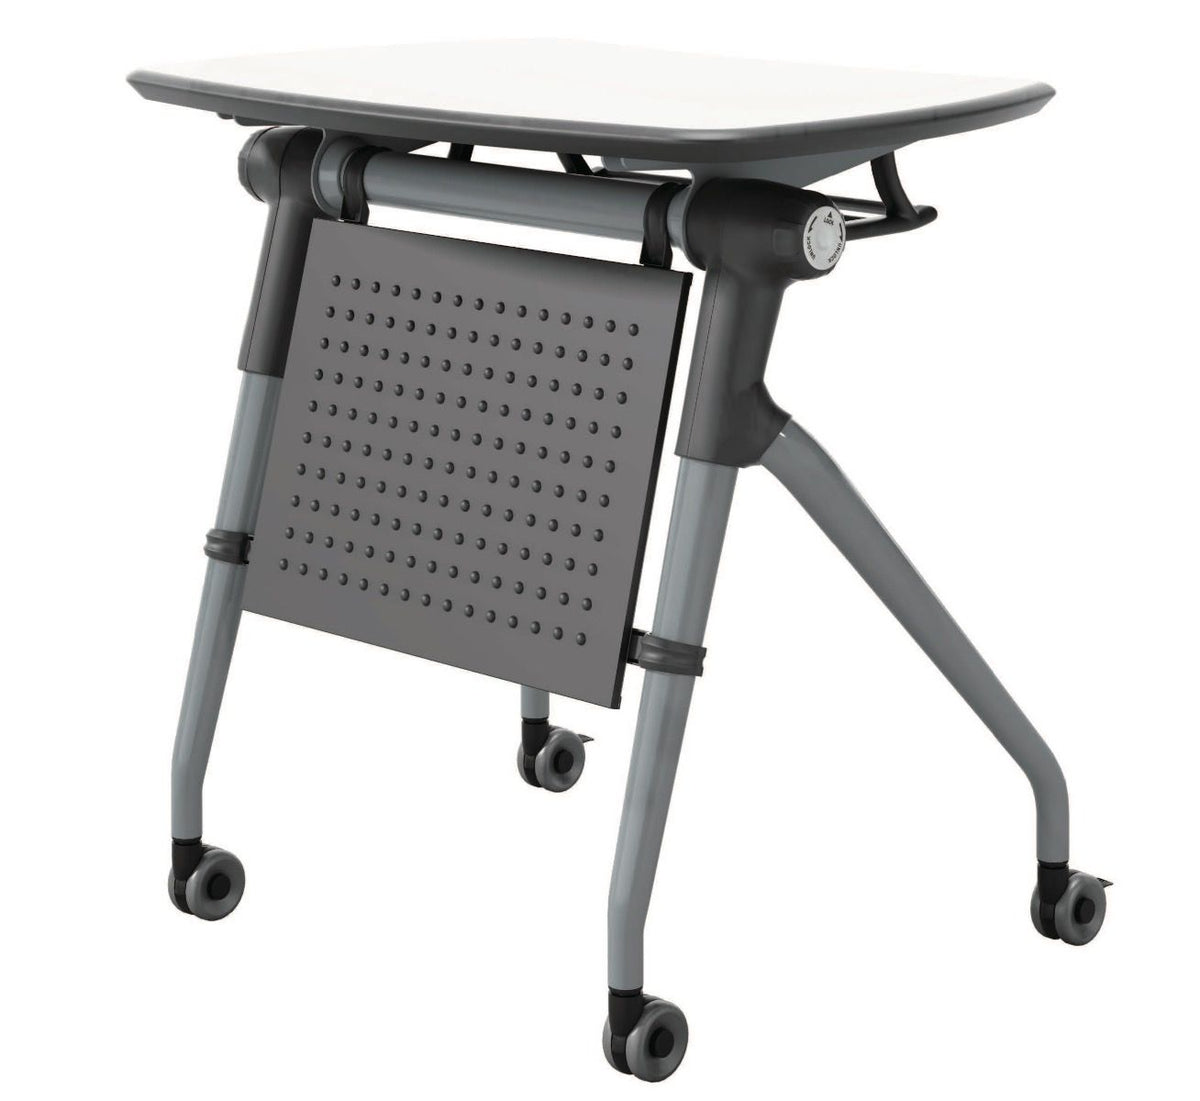 SYNCLINE MOBILE FLIP TOP TABLE